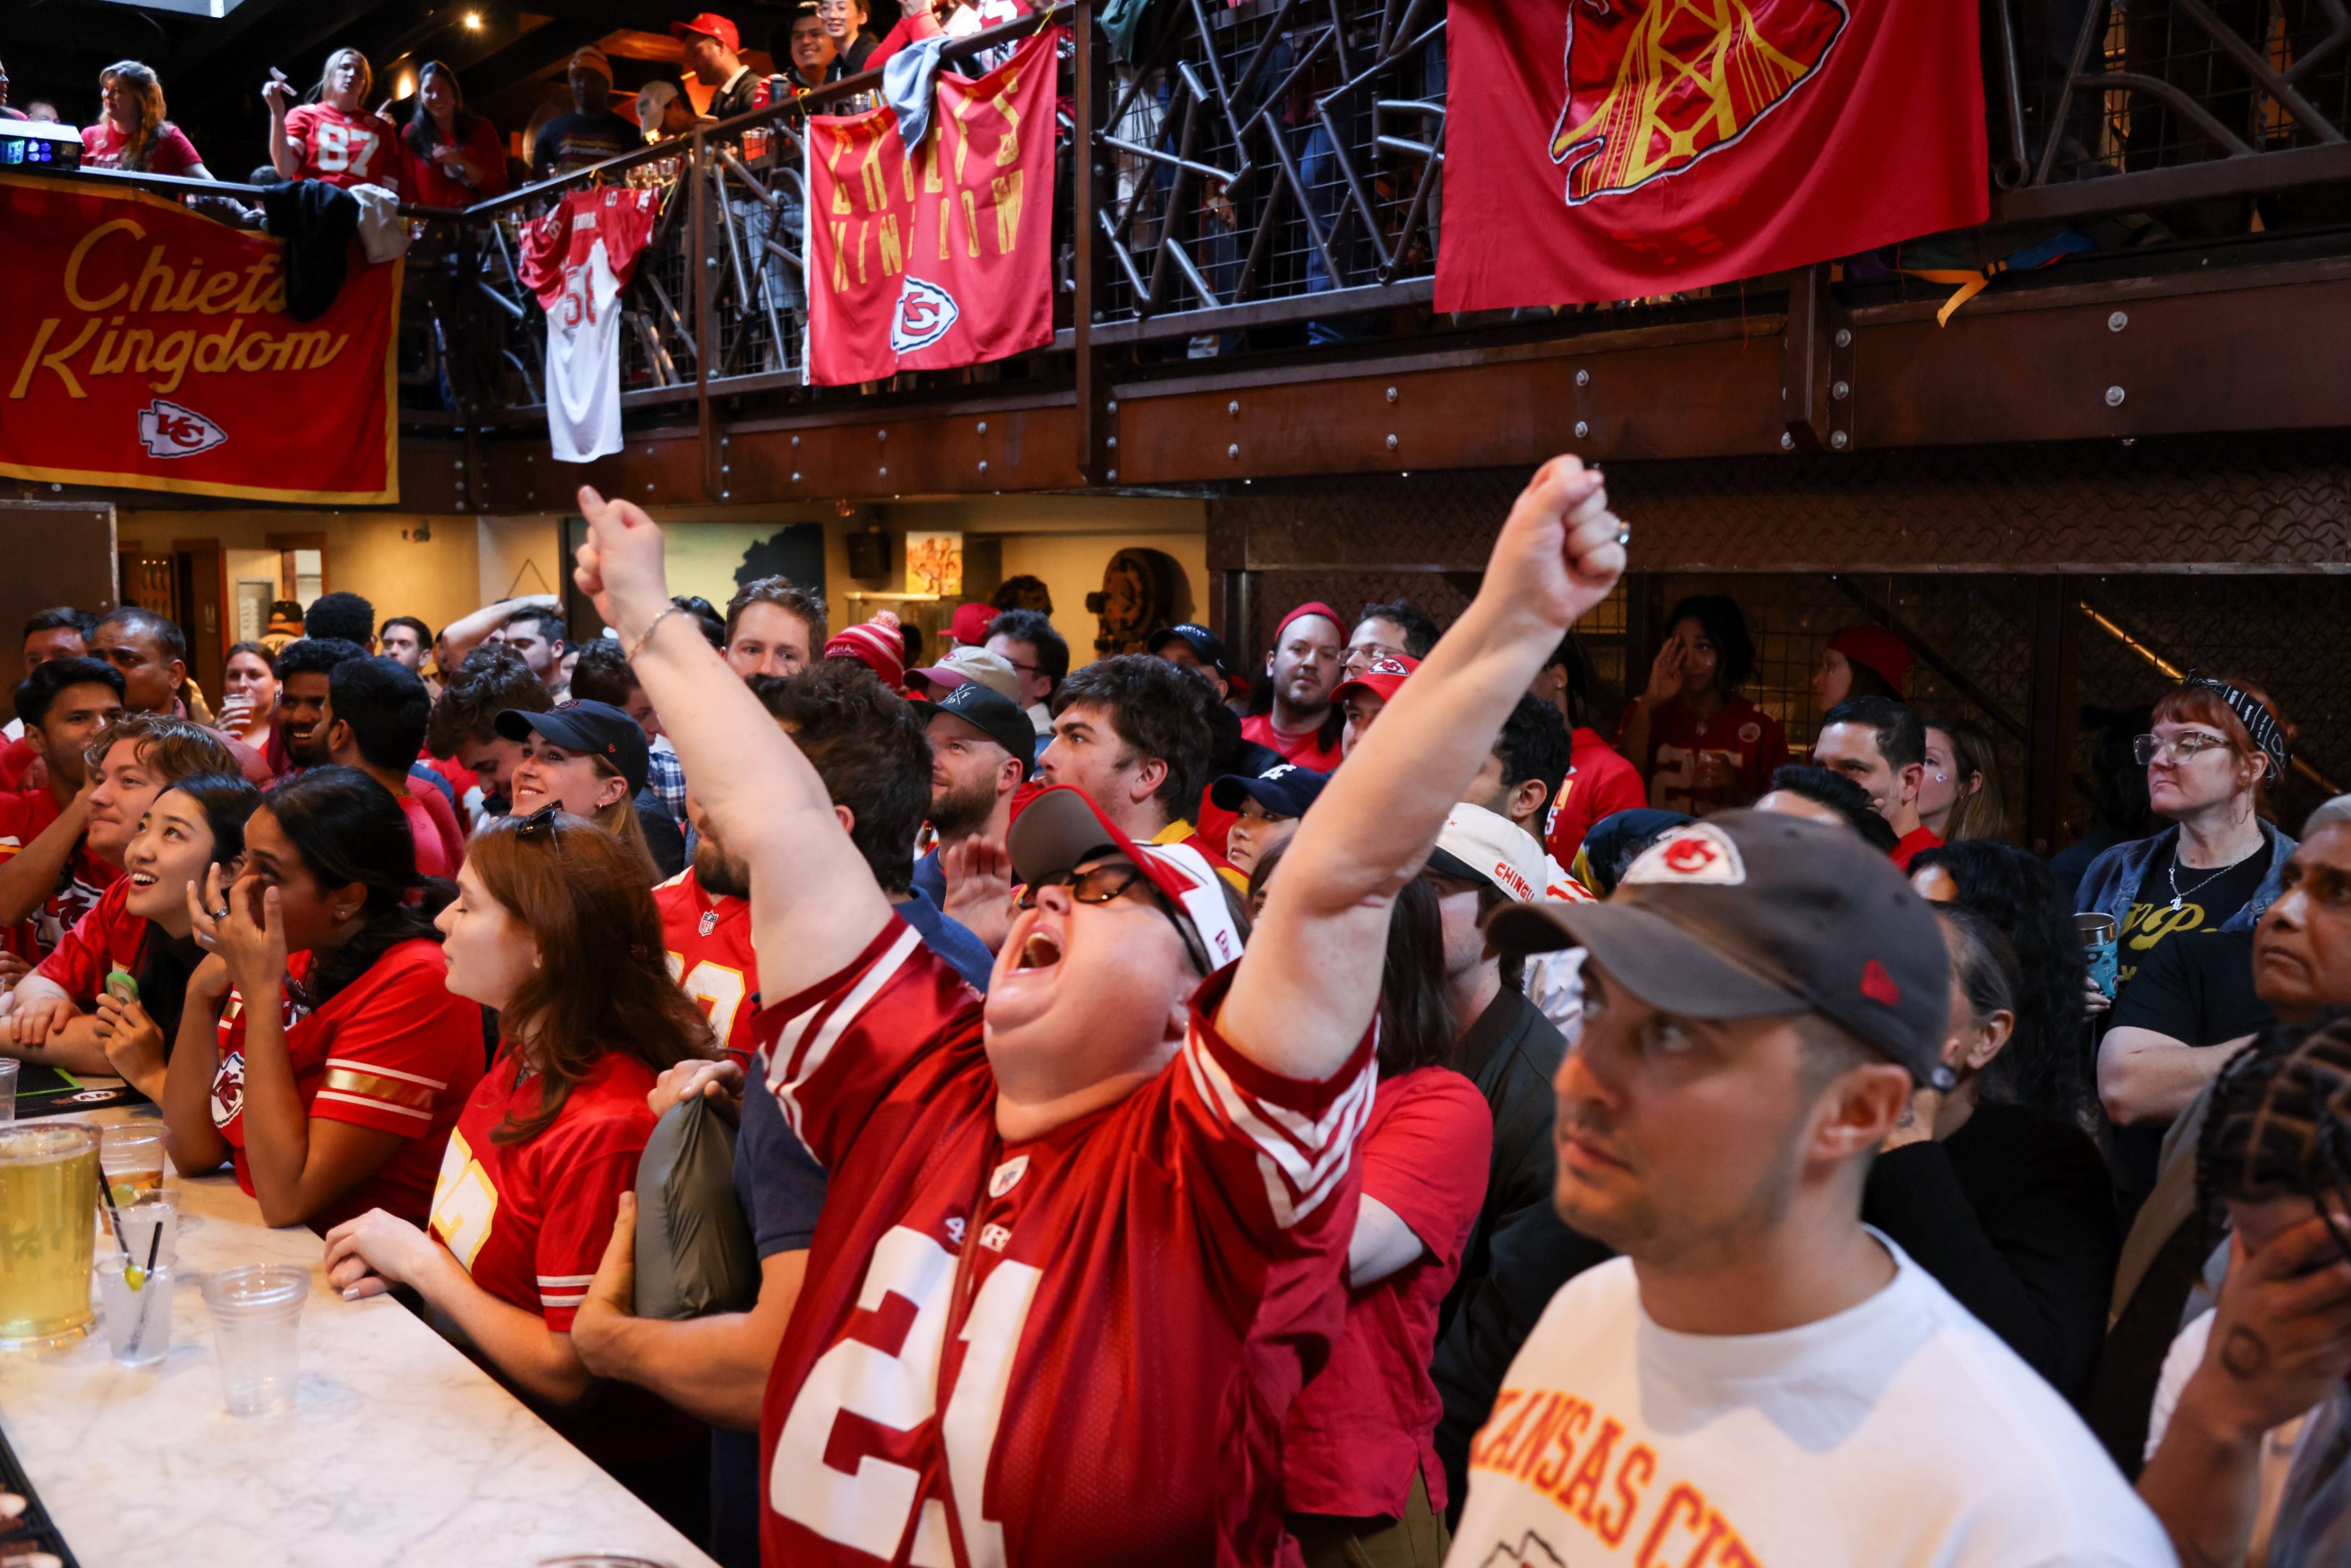 A crowd of excited fans in red jerseys cheering in a sports bar, with team banners above.